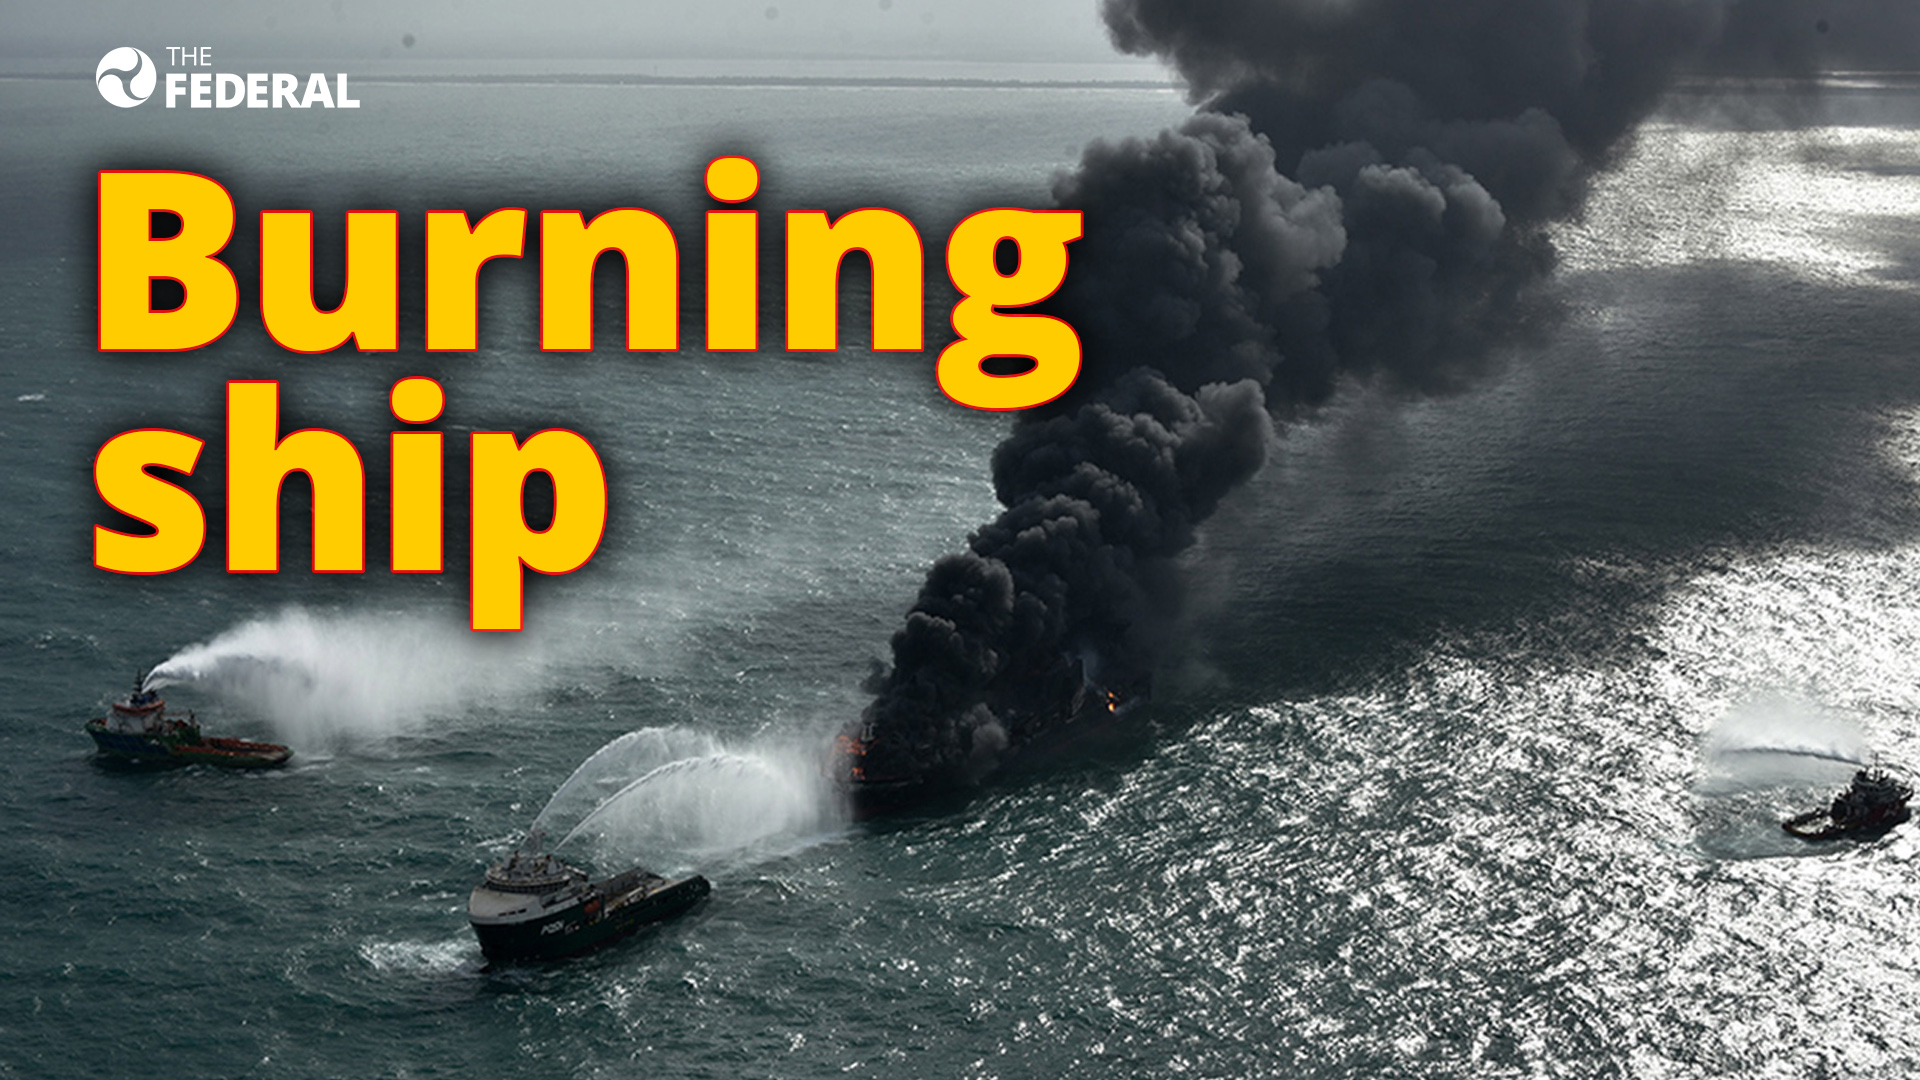 Ship burning for 7 days, likely to sink in few hours